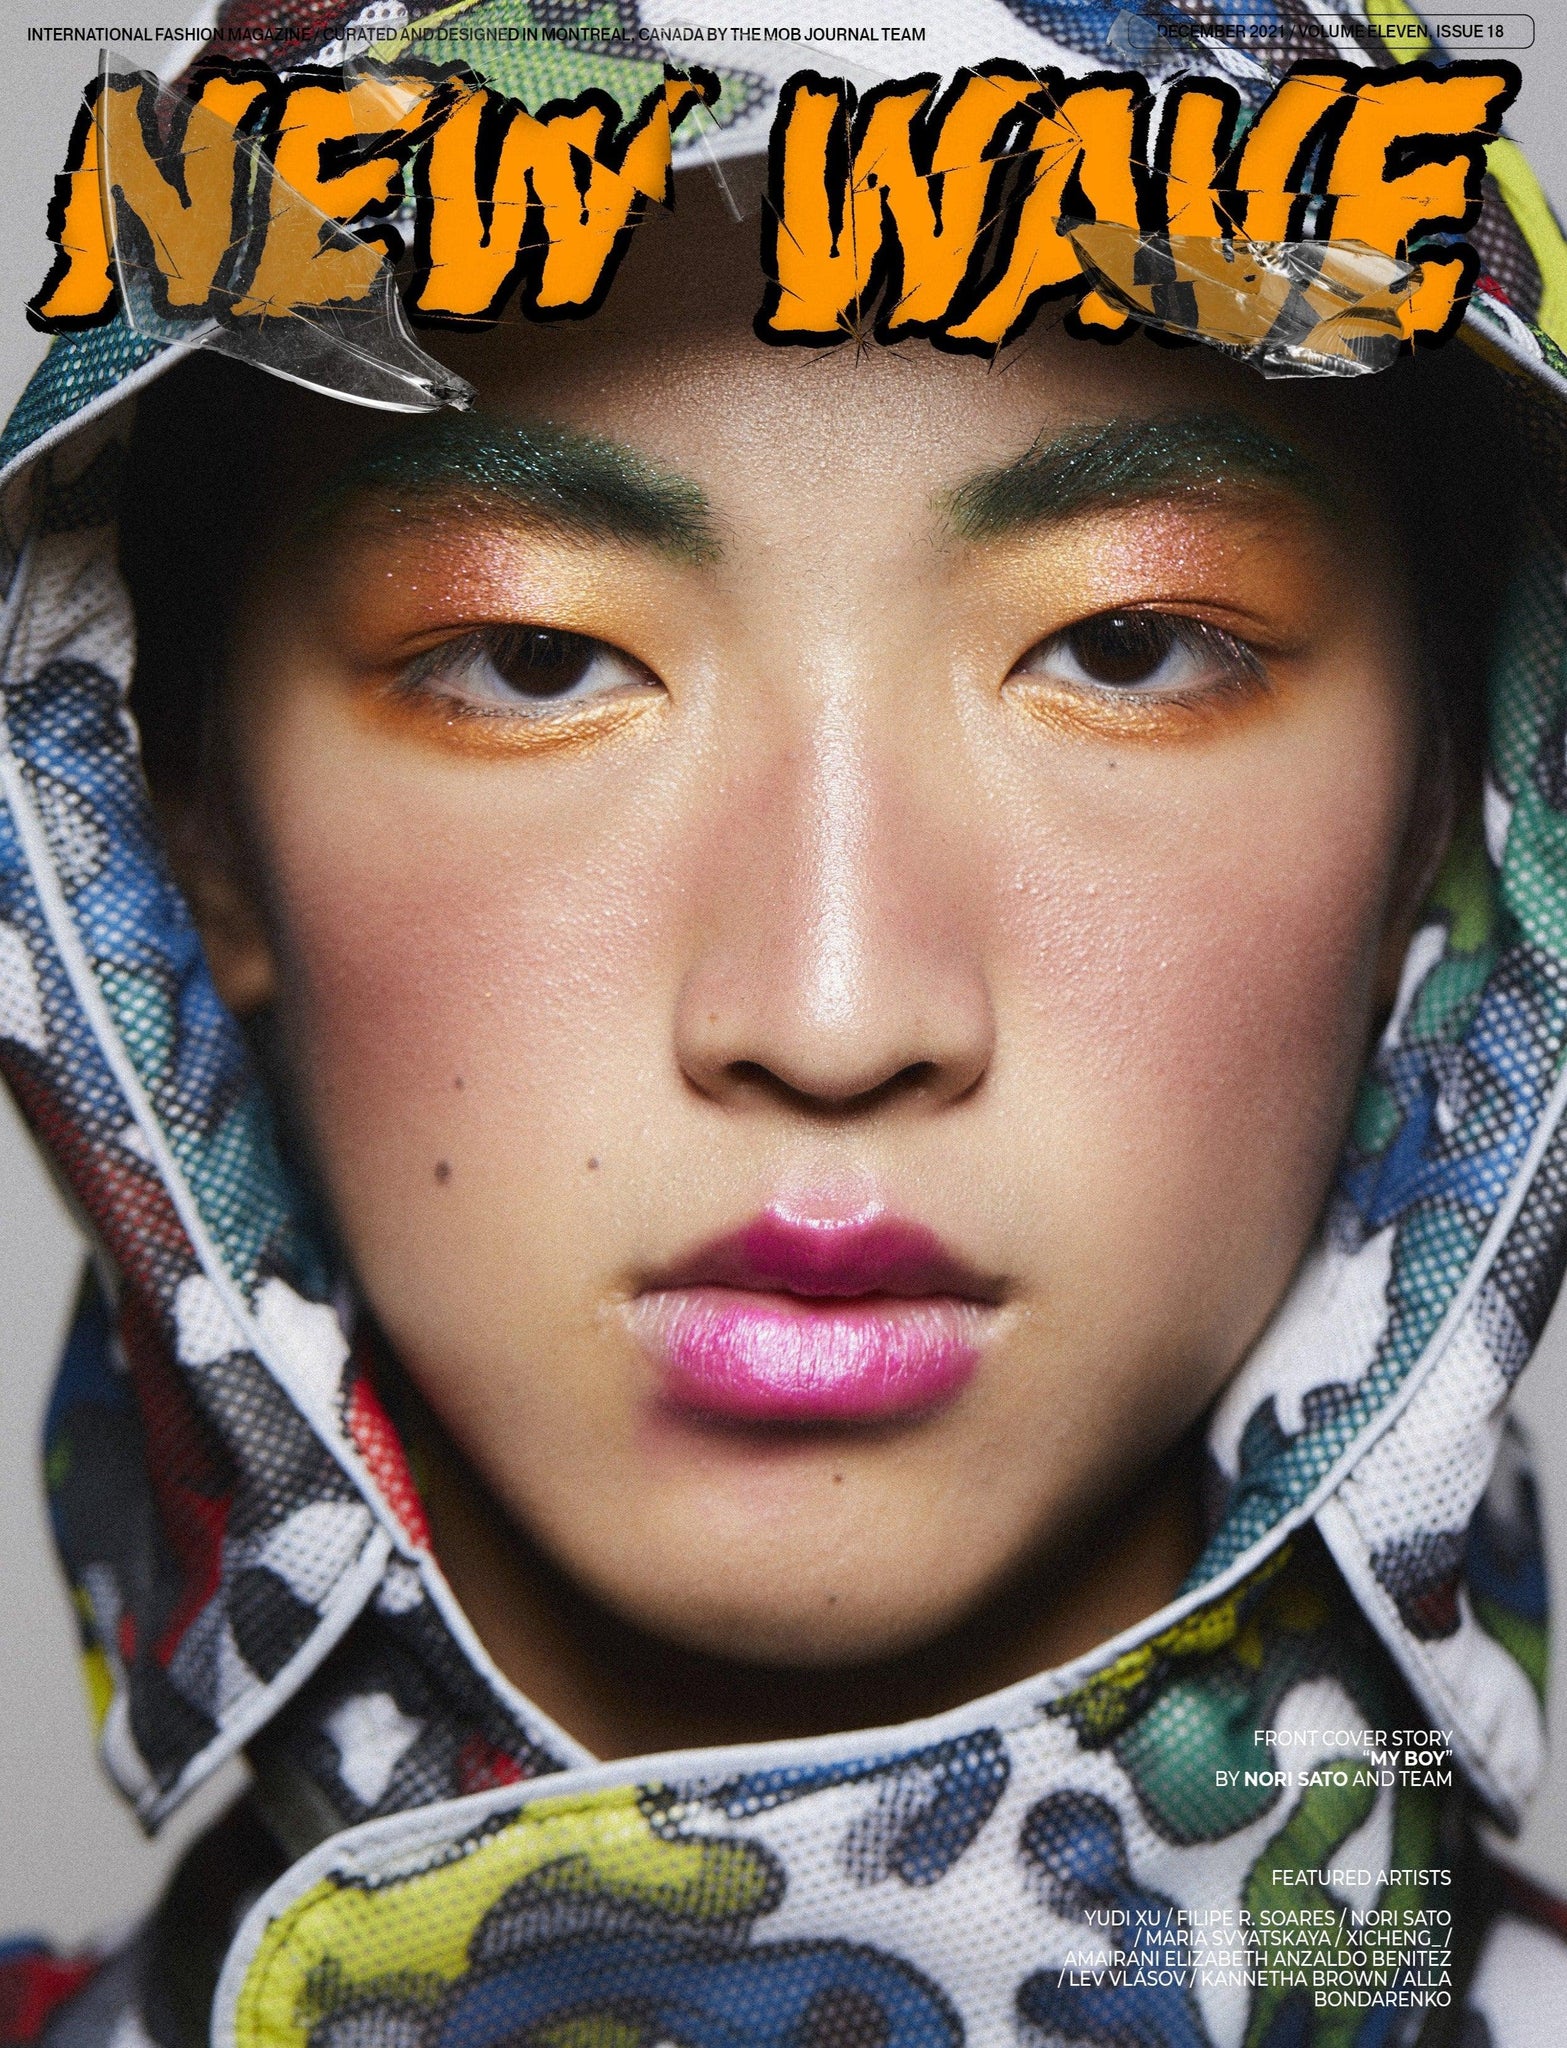 NEW WAVE | VOLUME ELEVEN | ISSUE #18 - Mob Journal